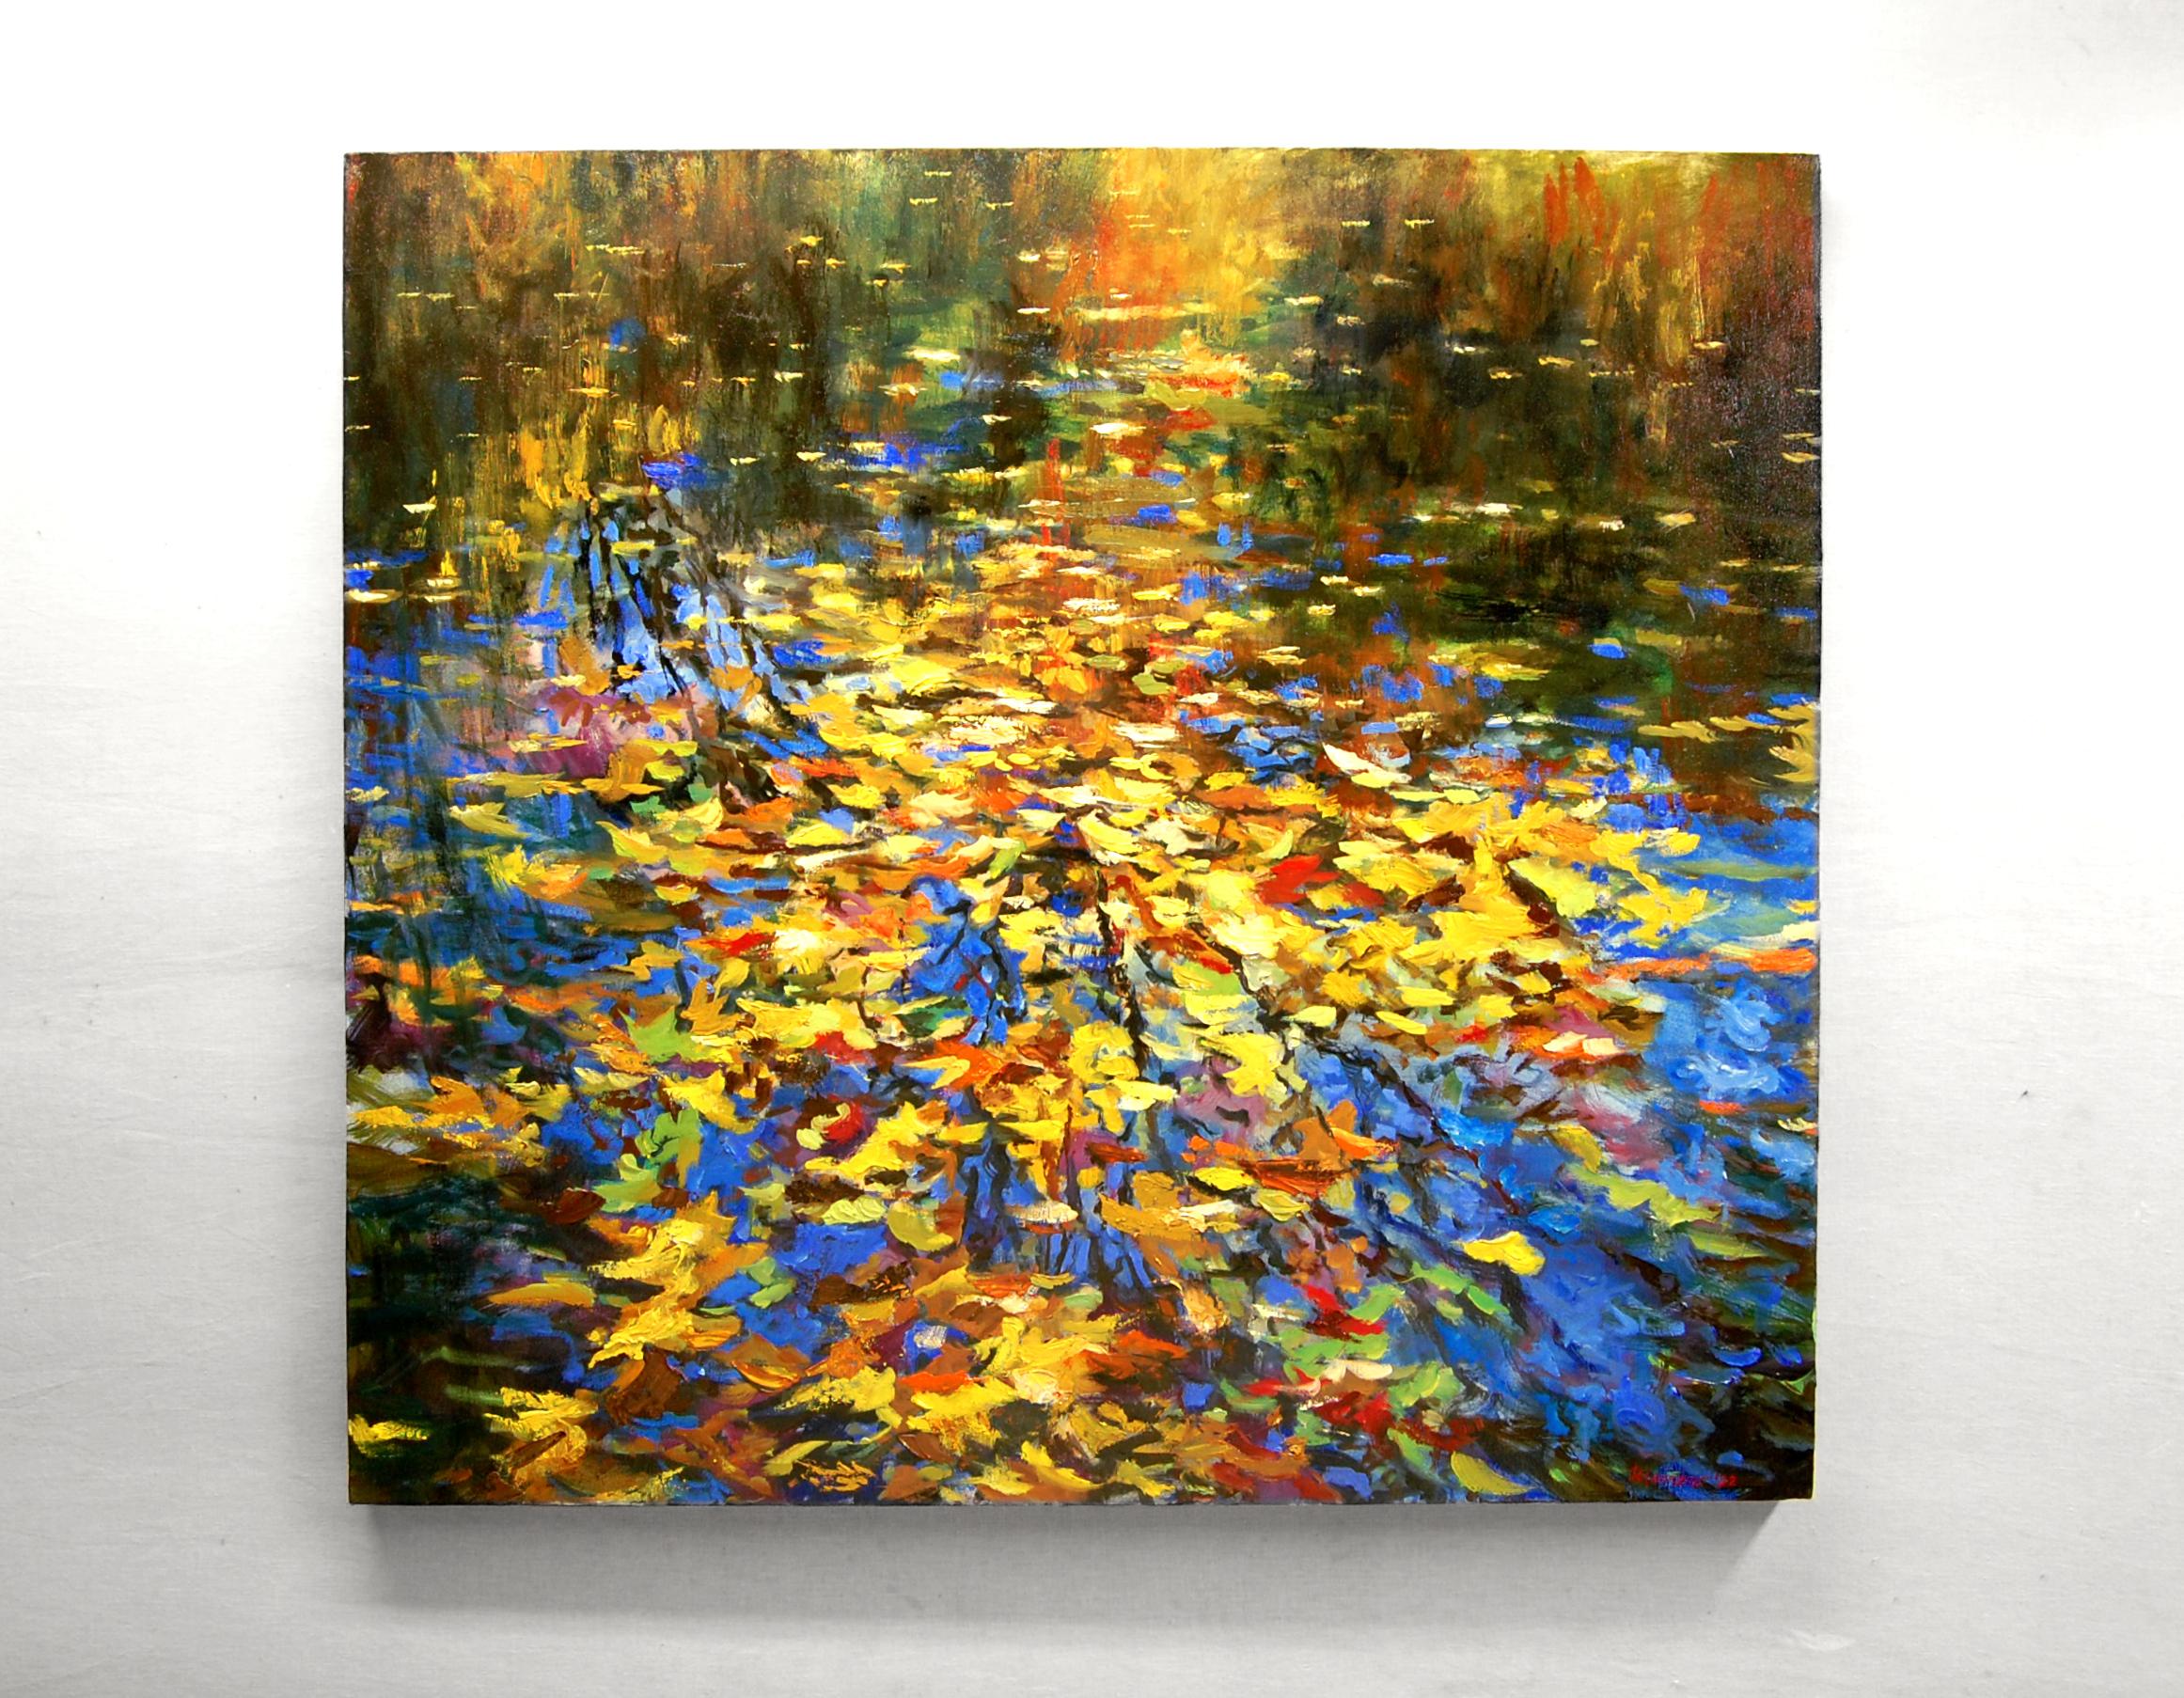 <p>Artist Comments<br>Artist Onelio Marrero paints golden oak and maple leaves in a pond. More vegetation skim and float, shining brightly under the sun. Part of his series of paintings that explores the colors and reflections of autumn foliage on